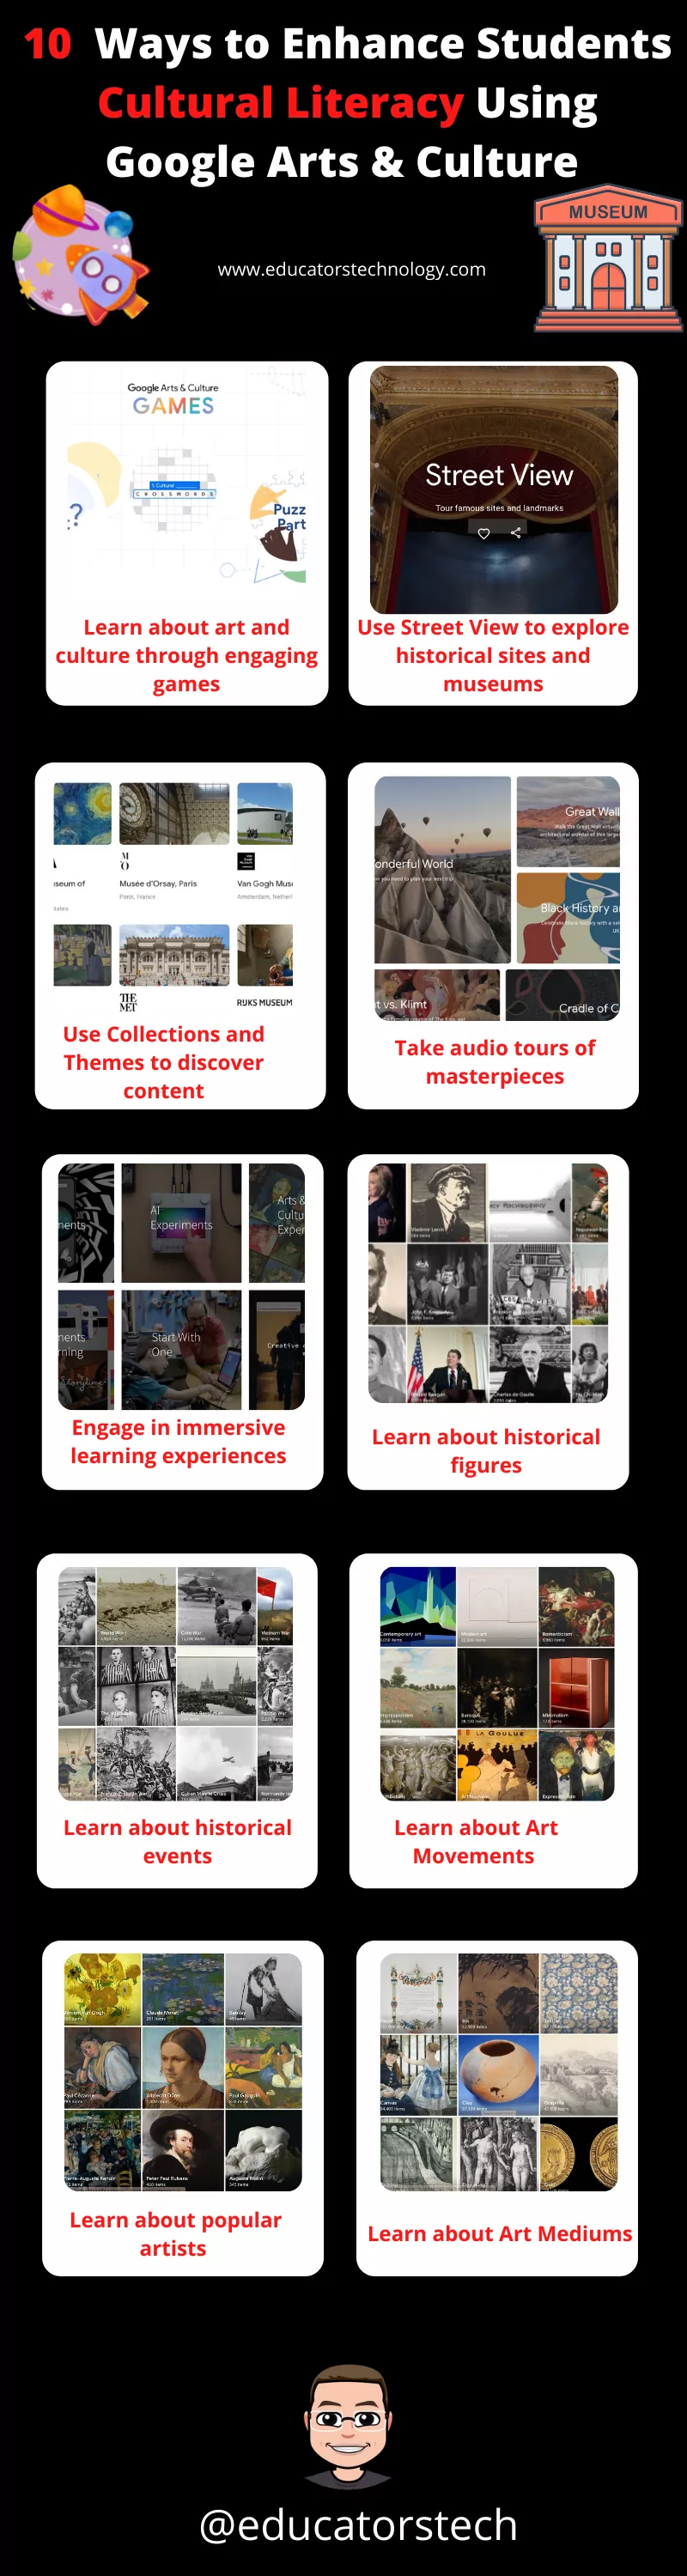 10 Effective Ways Students Can Use Google Arts & Culture to Enhance Their Cultural Literacy